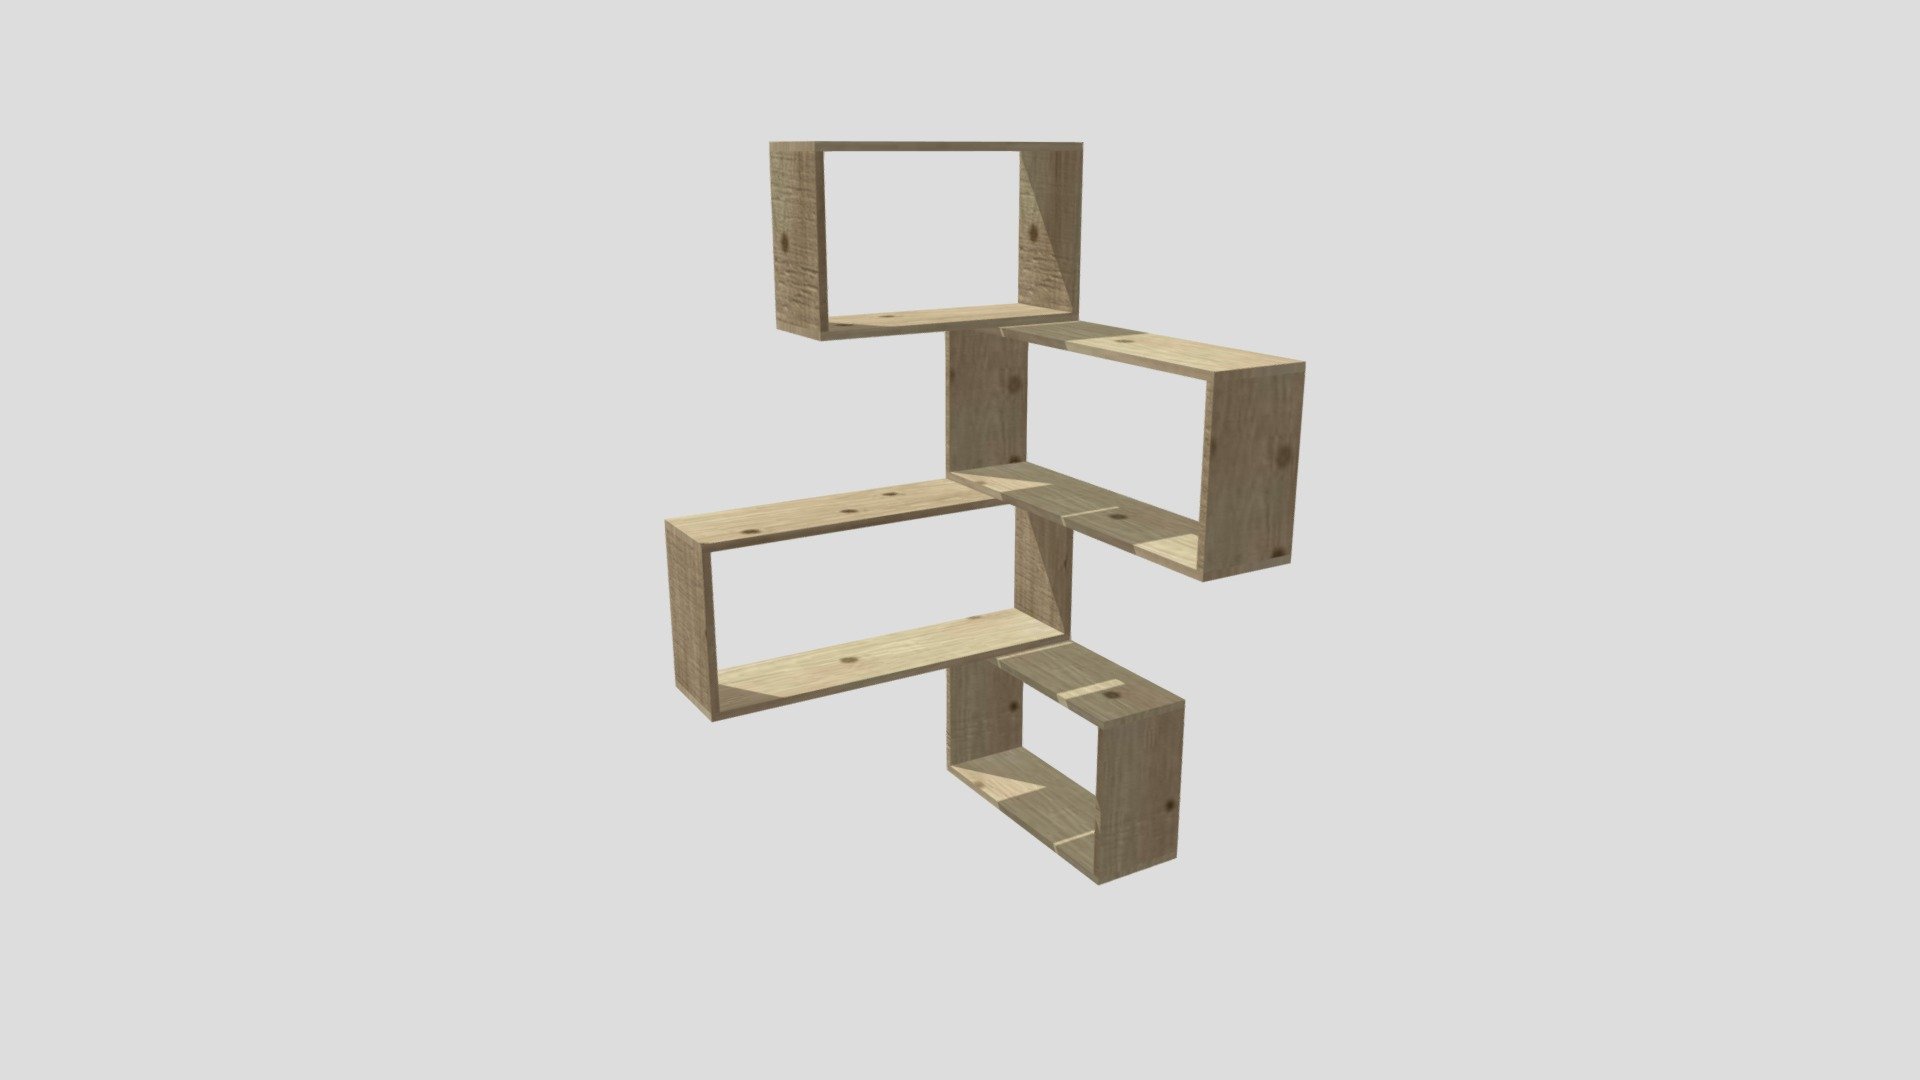 WOODEN WALL CORNER SHELF
If you have any questions, comments or errors, please let me know in order to correct them. 
Best regards 
Koceila - WALL CORNER SHELF - Download Free 3D model by kakou3991 3d model